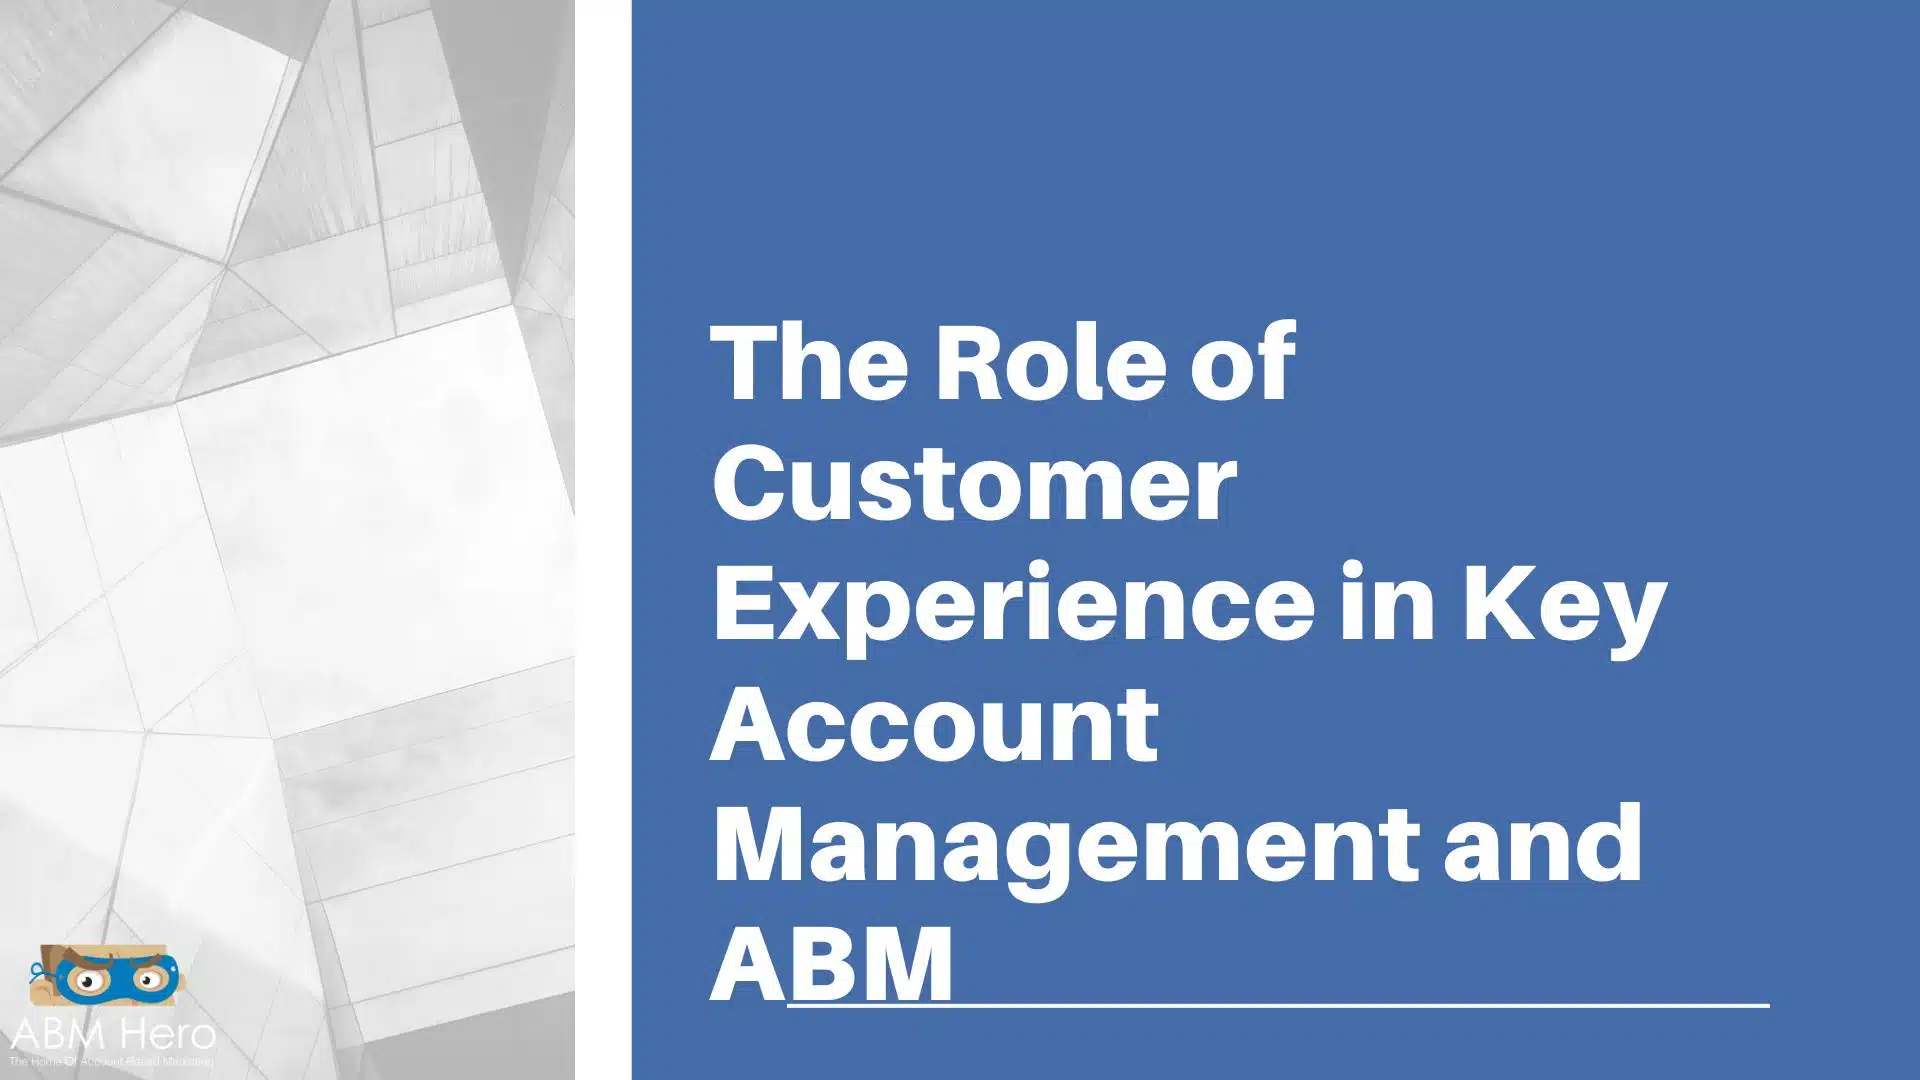 You are currently viewing The Role of Customer Experience in Key Account Management and ABM